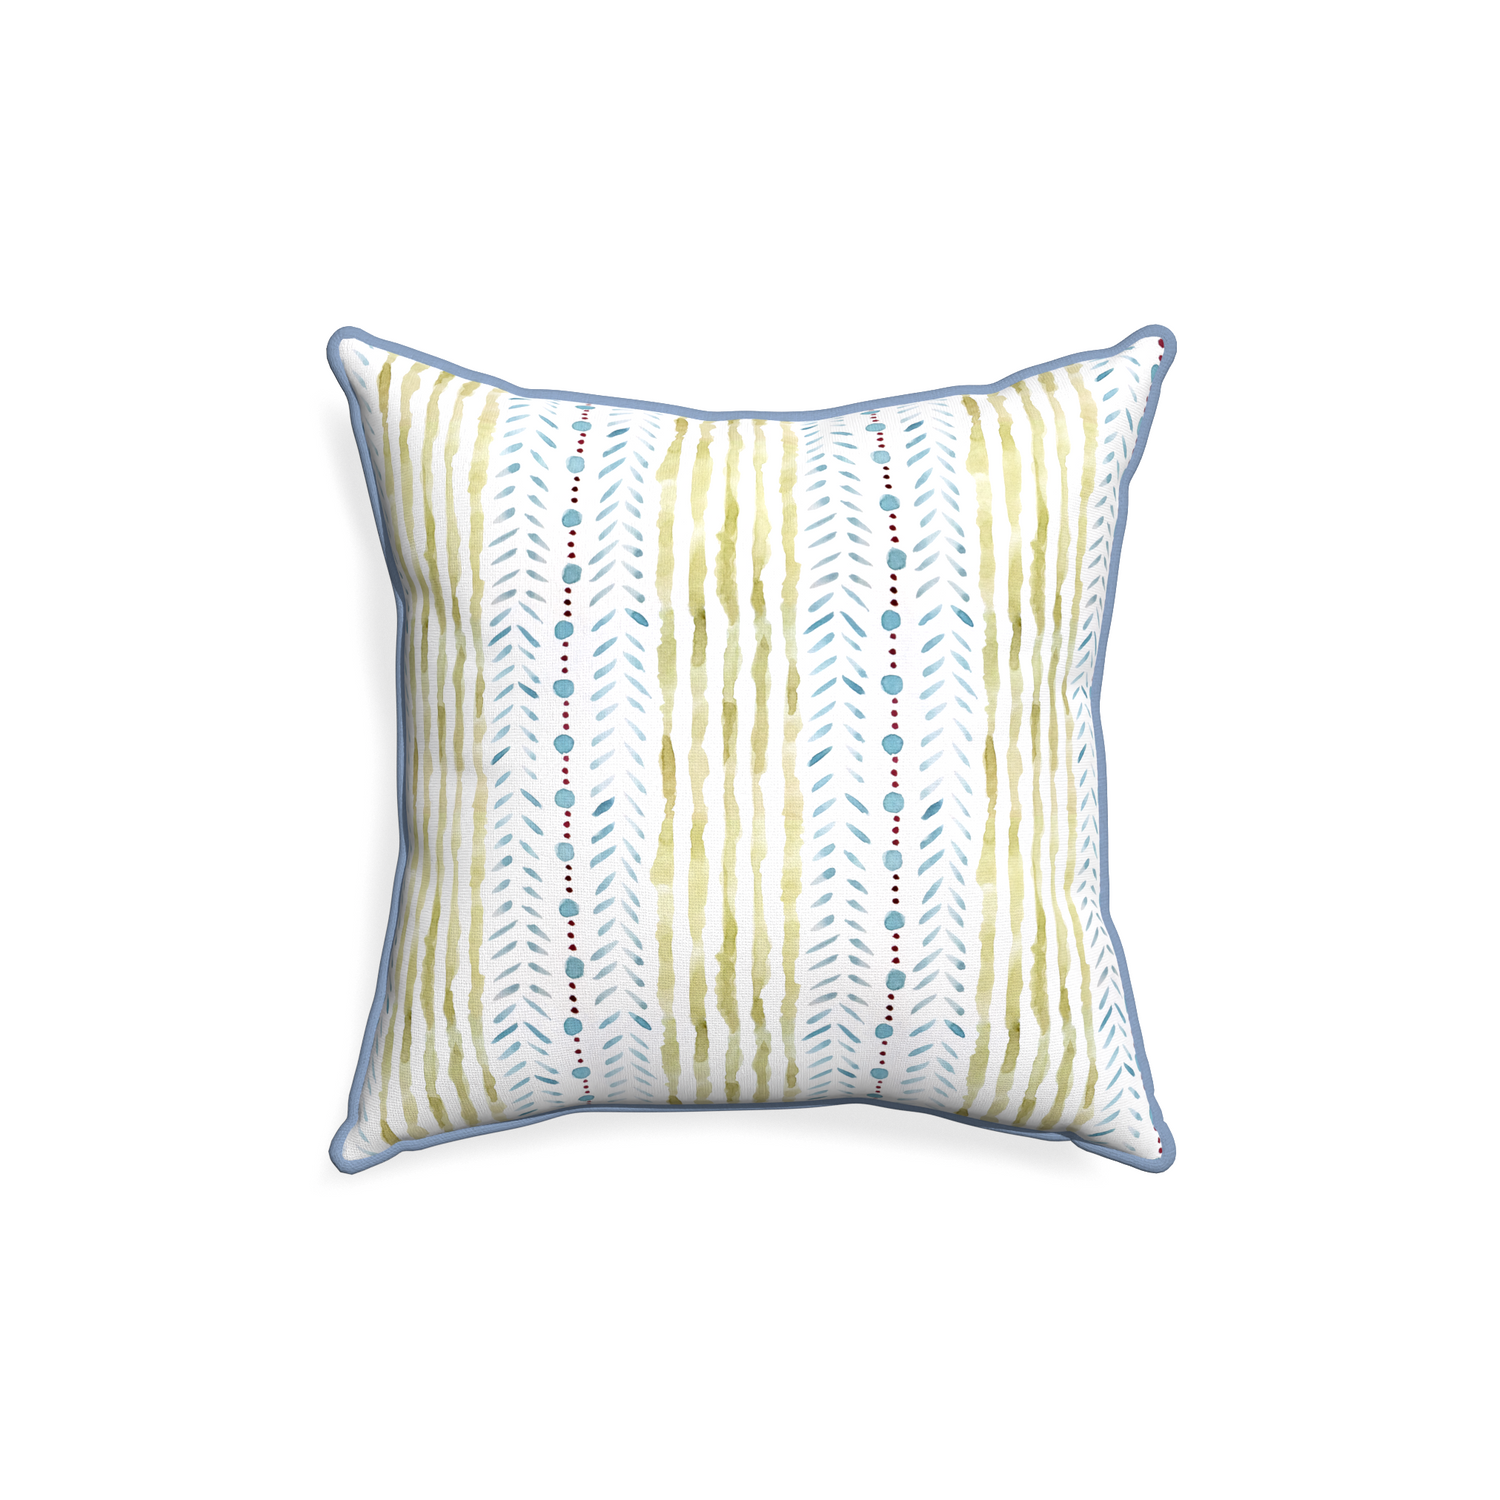 18-square julia custom blue & green stripedpillow with sky piping on white background